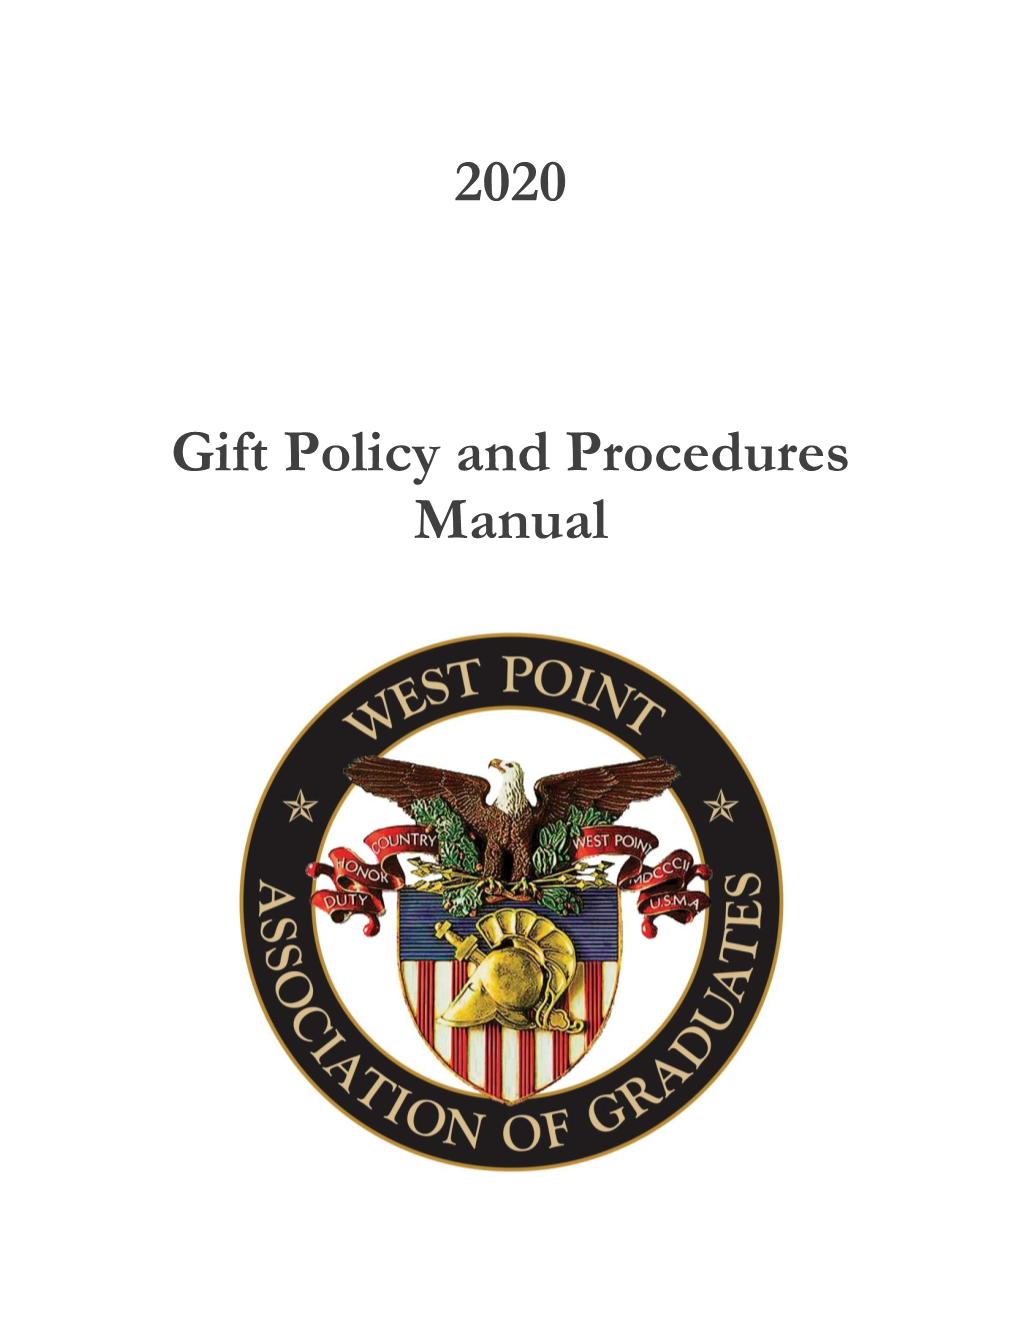 2020 Gift Policy and Procedures Manual